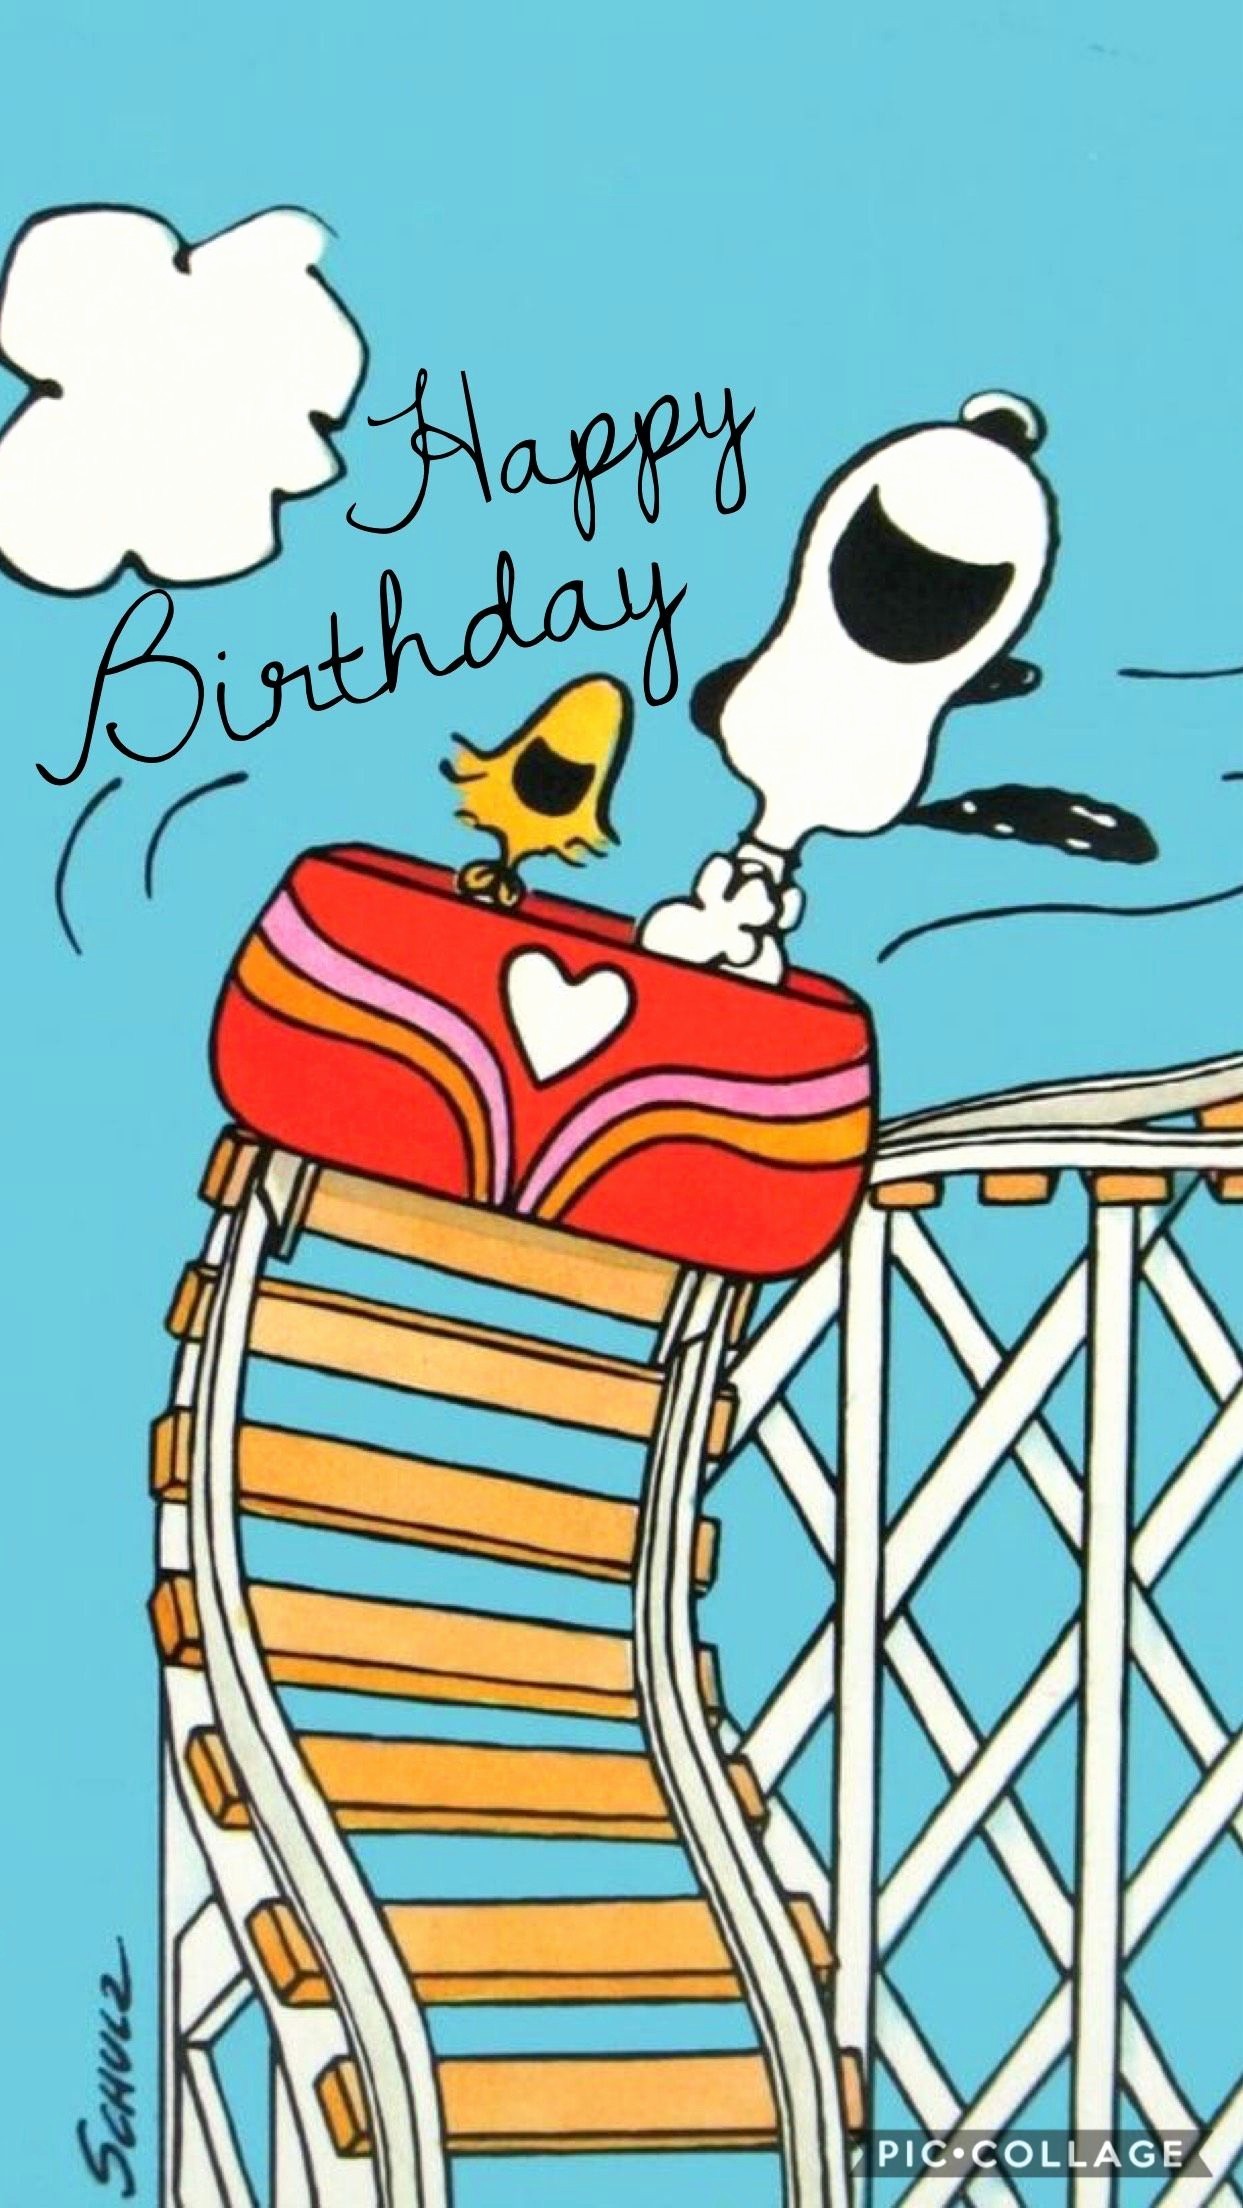 1243x2208 Desktop Snoopy Hd Wallpapers Awesome Wallpaper Desktop Windows 7 Awesome  Windows 7 Wallpaper Of Desktop Snoopy